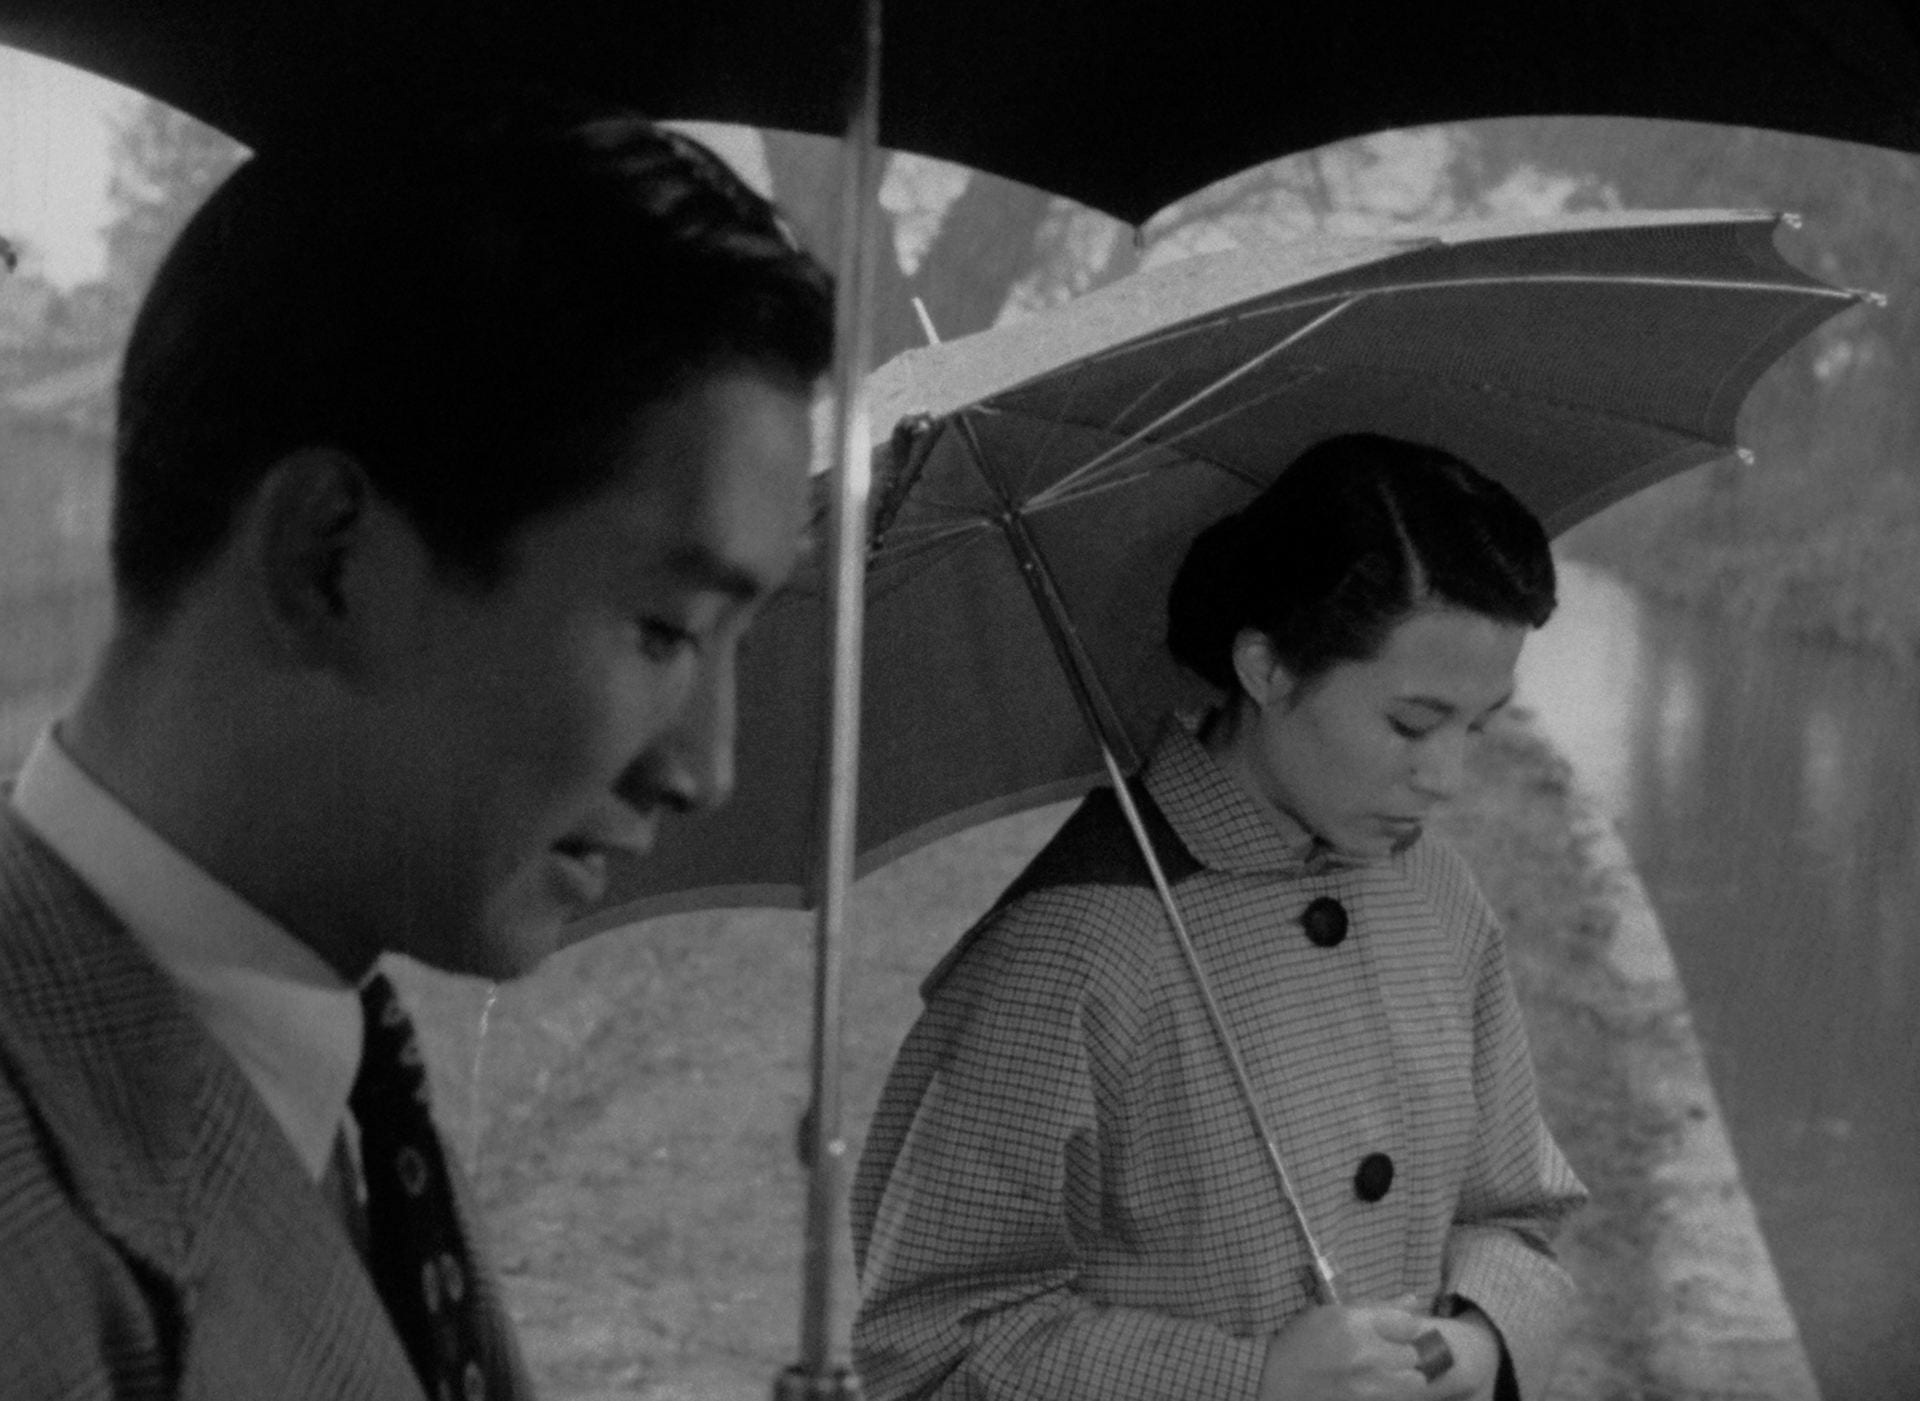 A man and woman stare at the ground, holding umbrellas